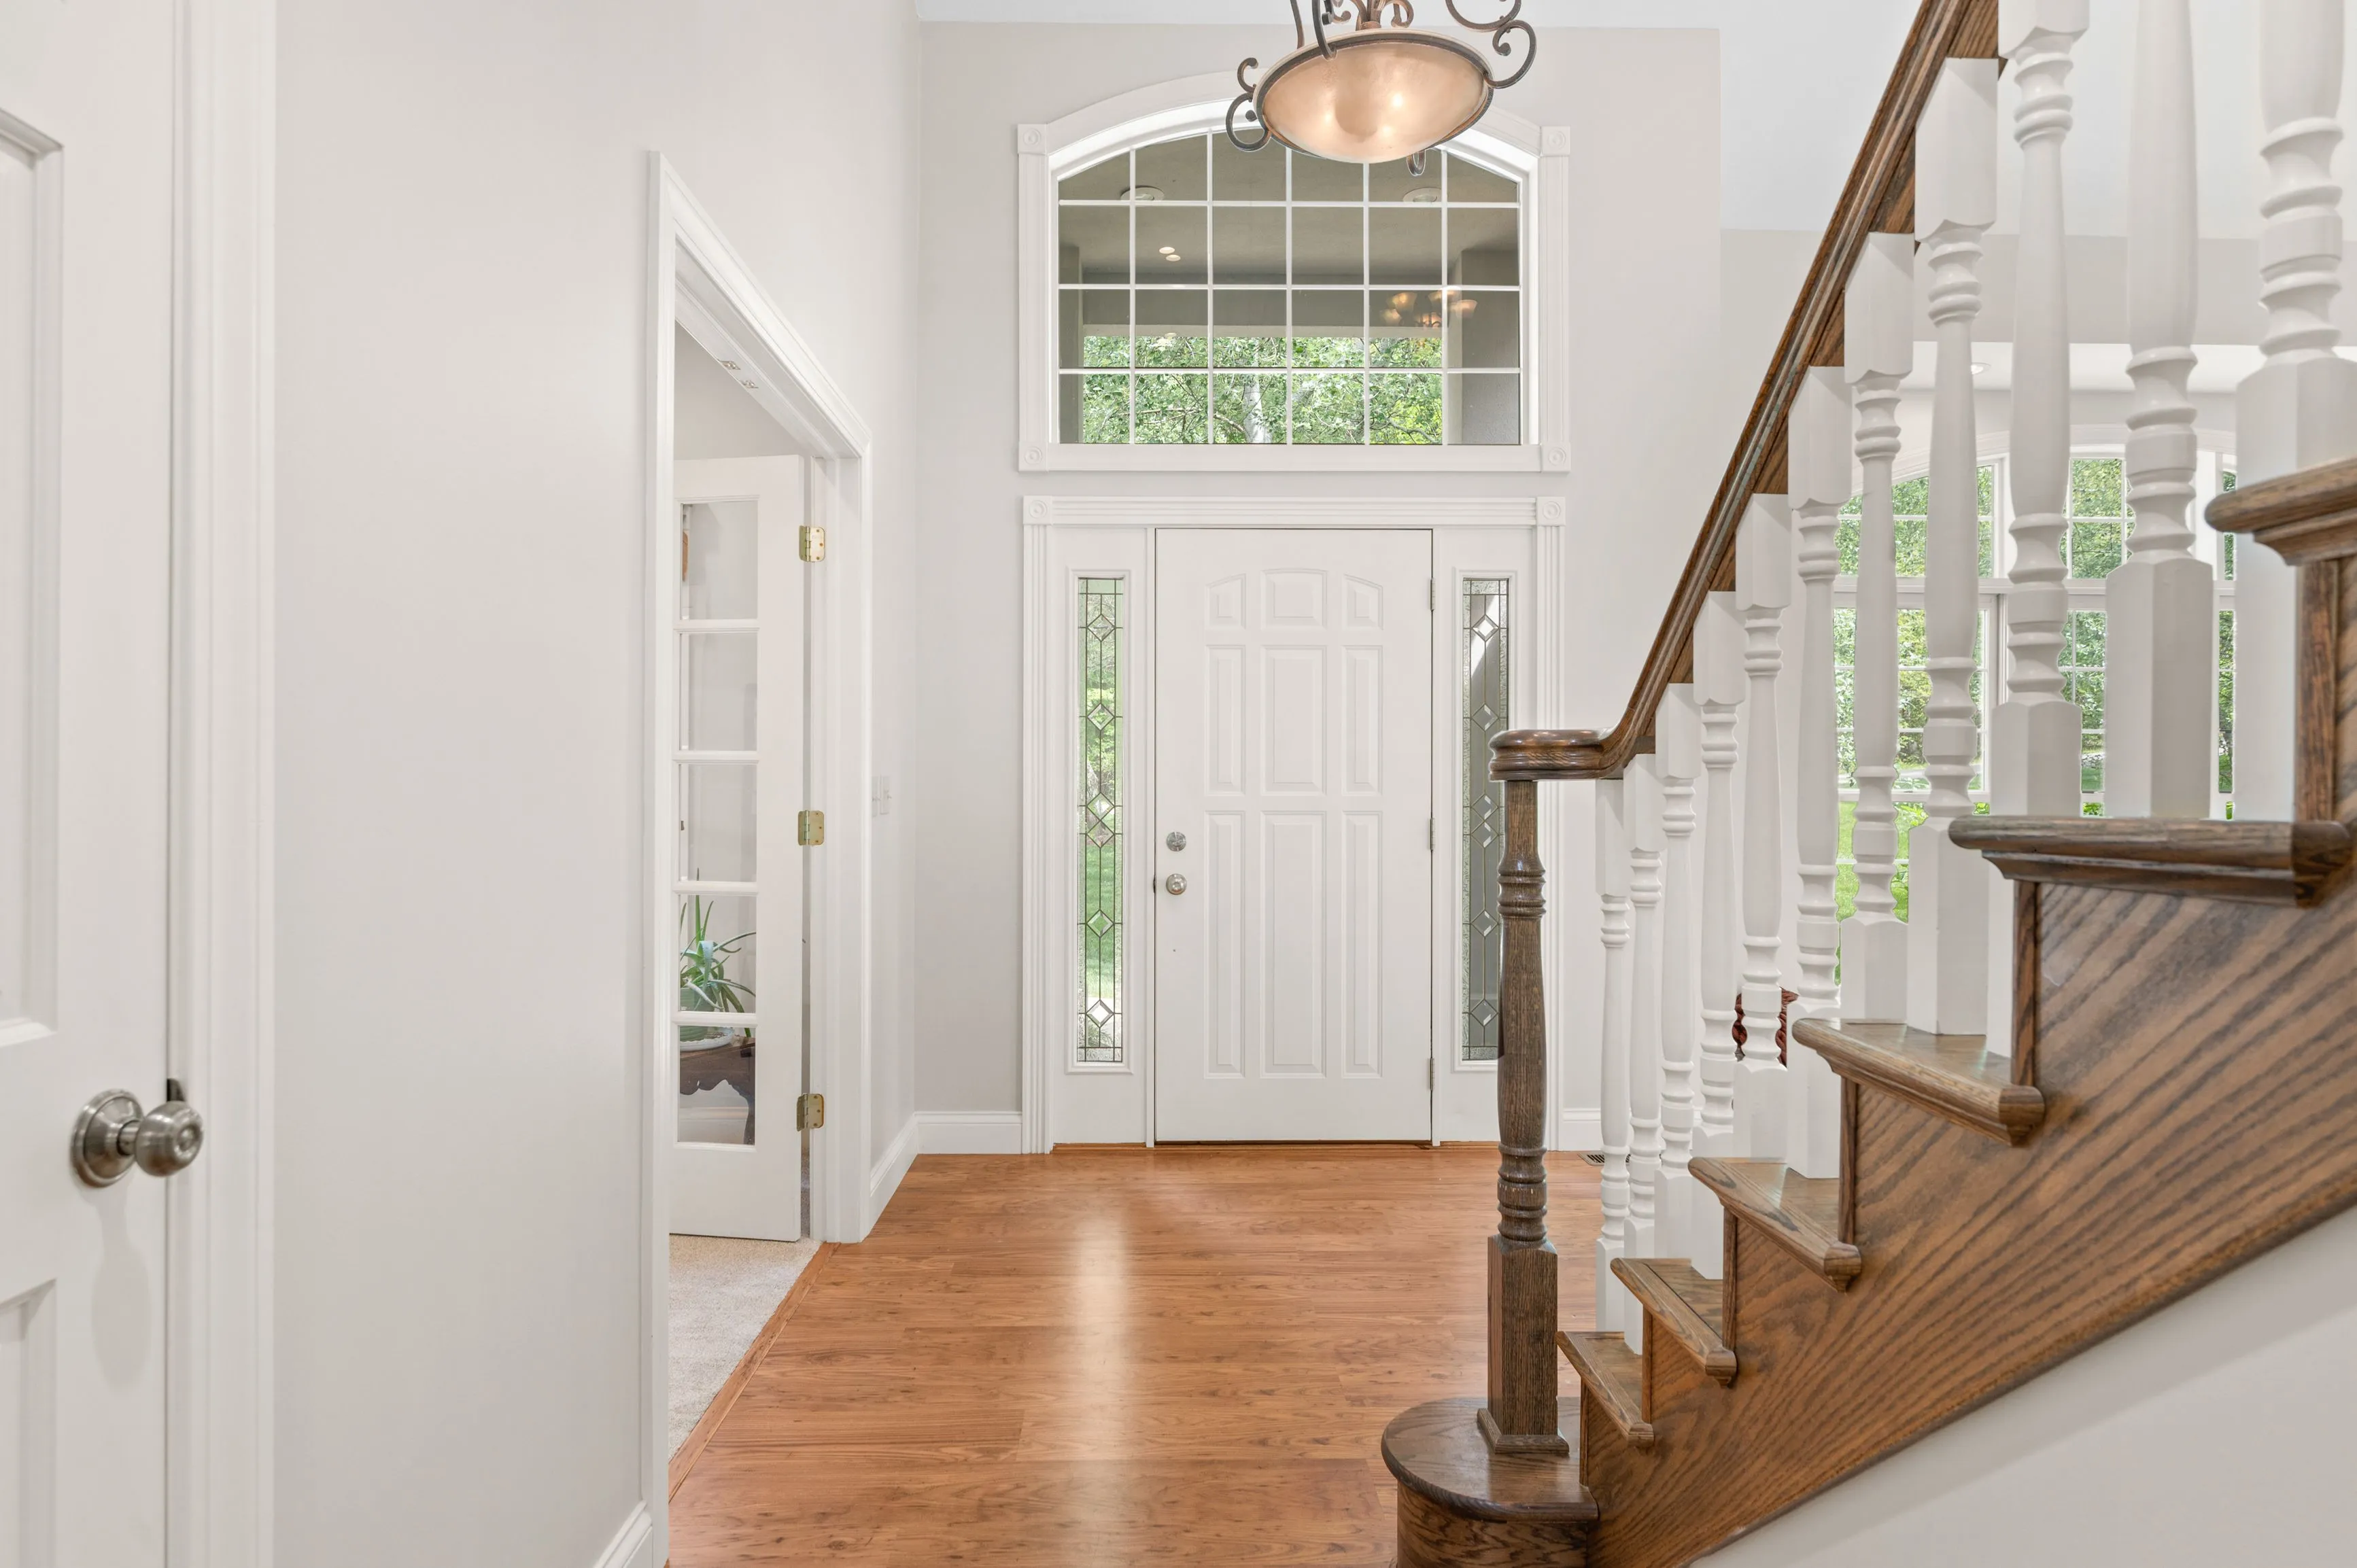 Bright and airy entryway with hardwood floors, a white front door with sidelights and transom window, and a wooden staircase with white spindles.